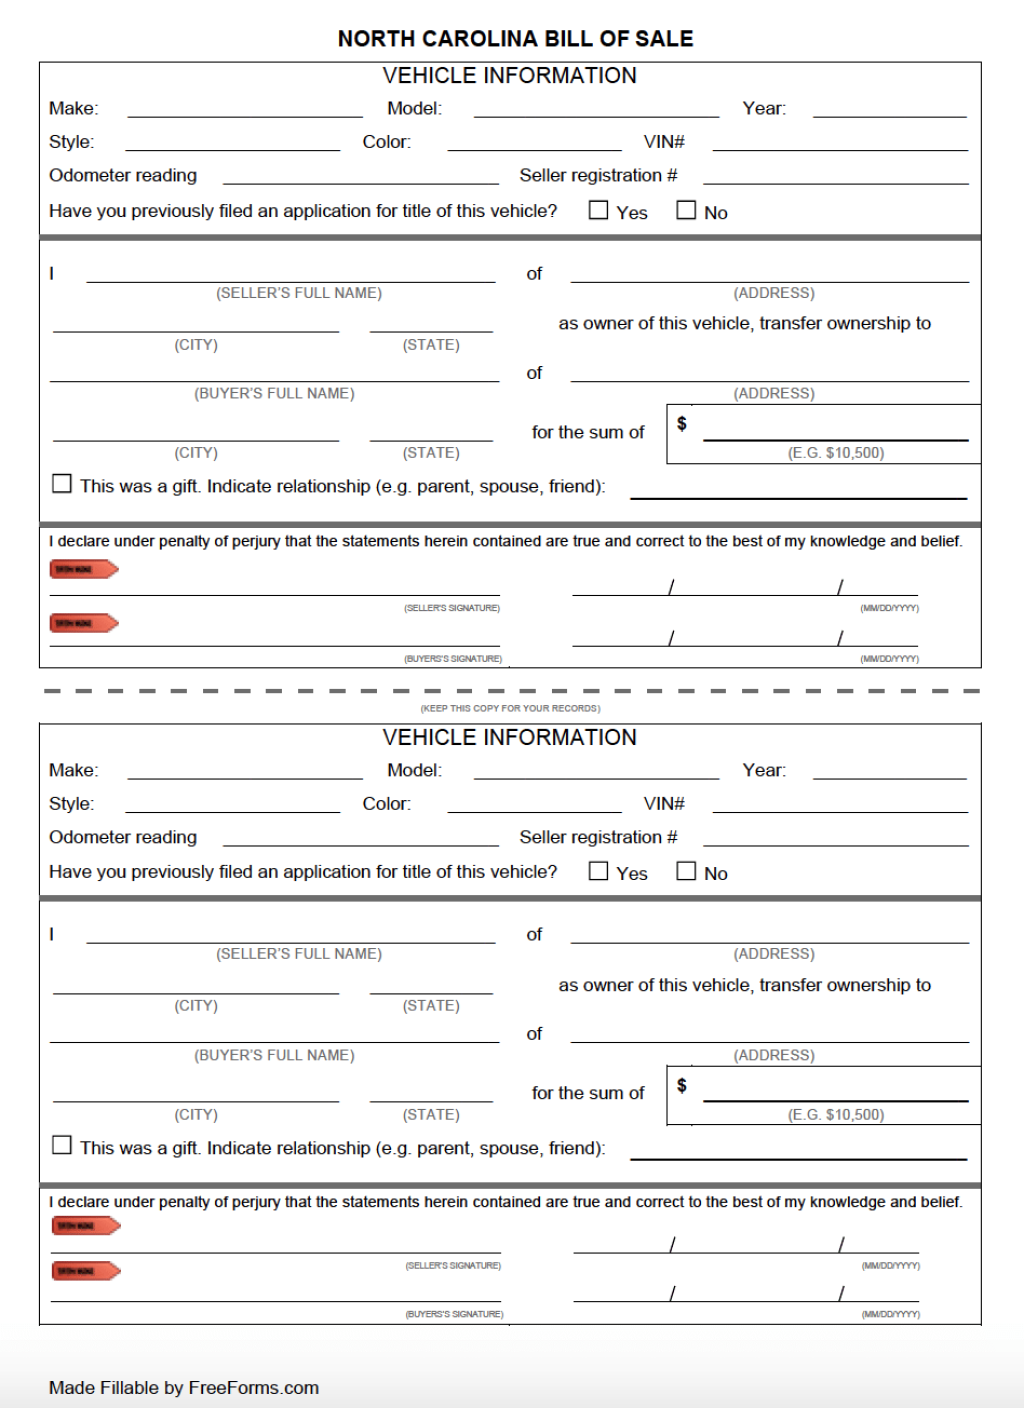 Picture of: Free North Carolina Bill of Sale Forms  PDF